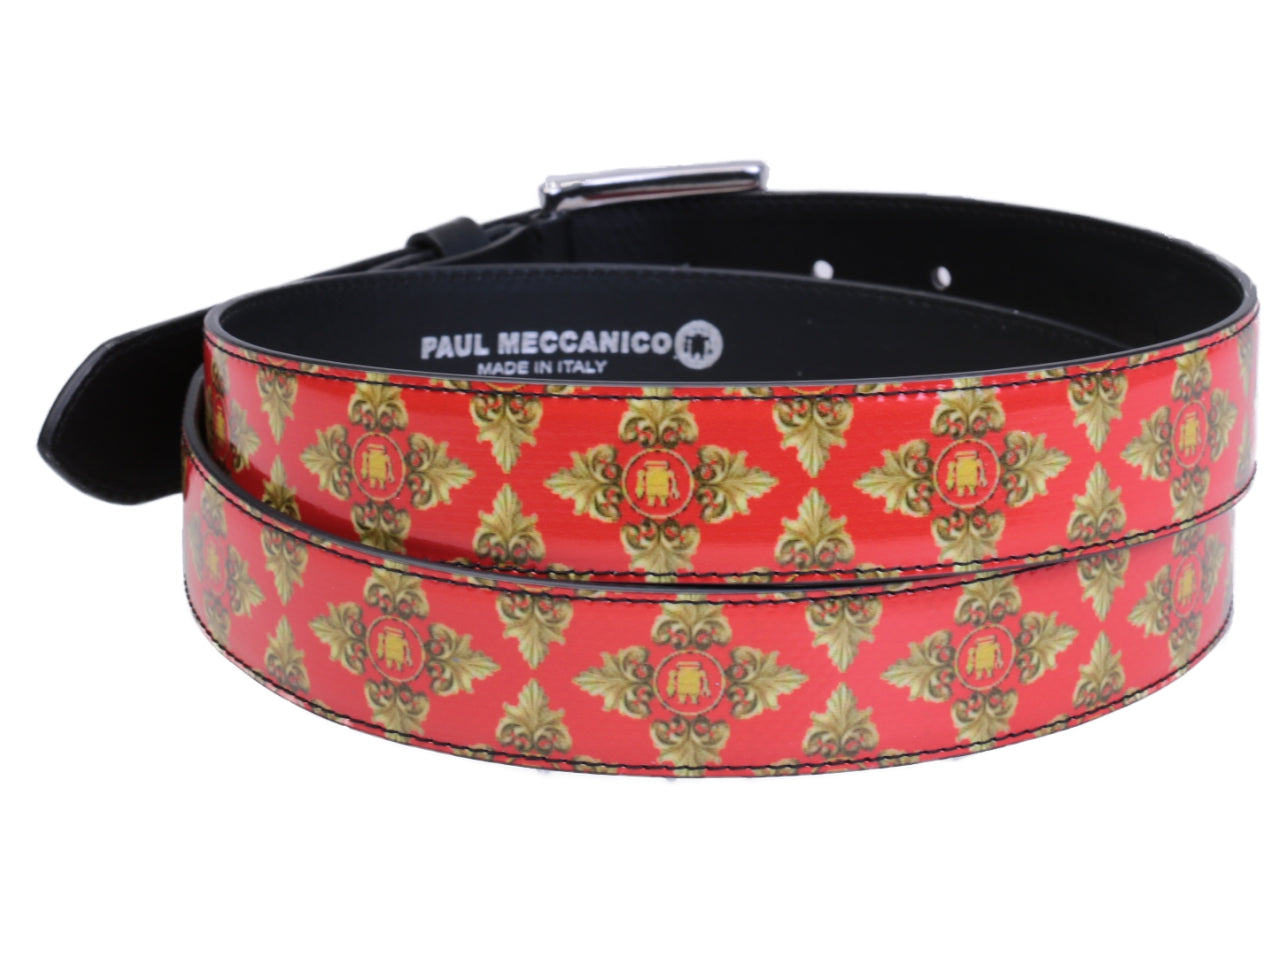 RED WOMEN'S BELT WITH LIBERTY FANTASY MADE OF LORRY TARPAULIN. - Unique Pieces Paul Meccanico